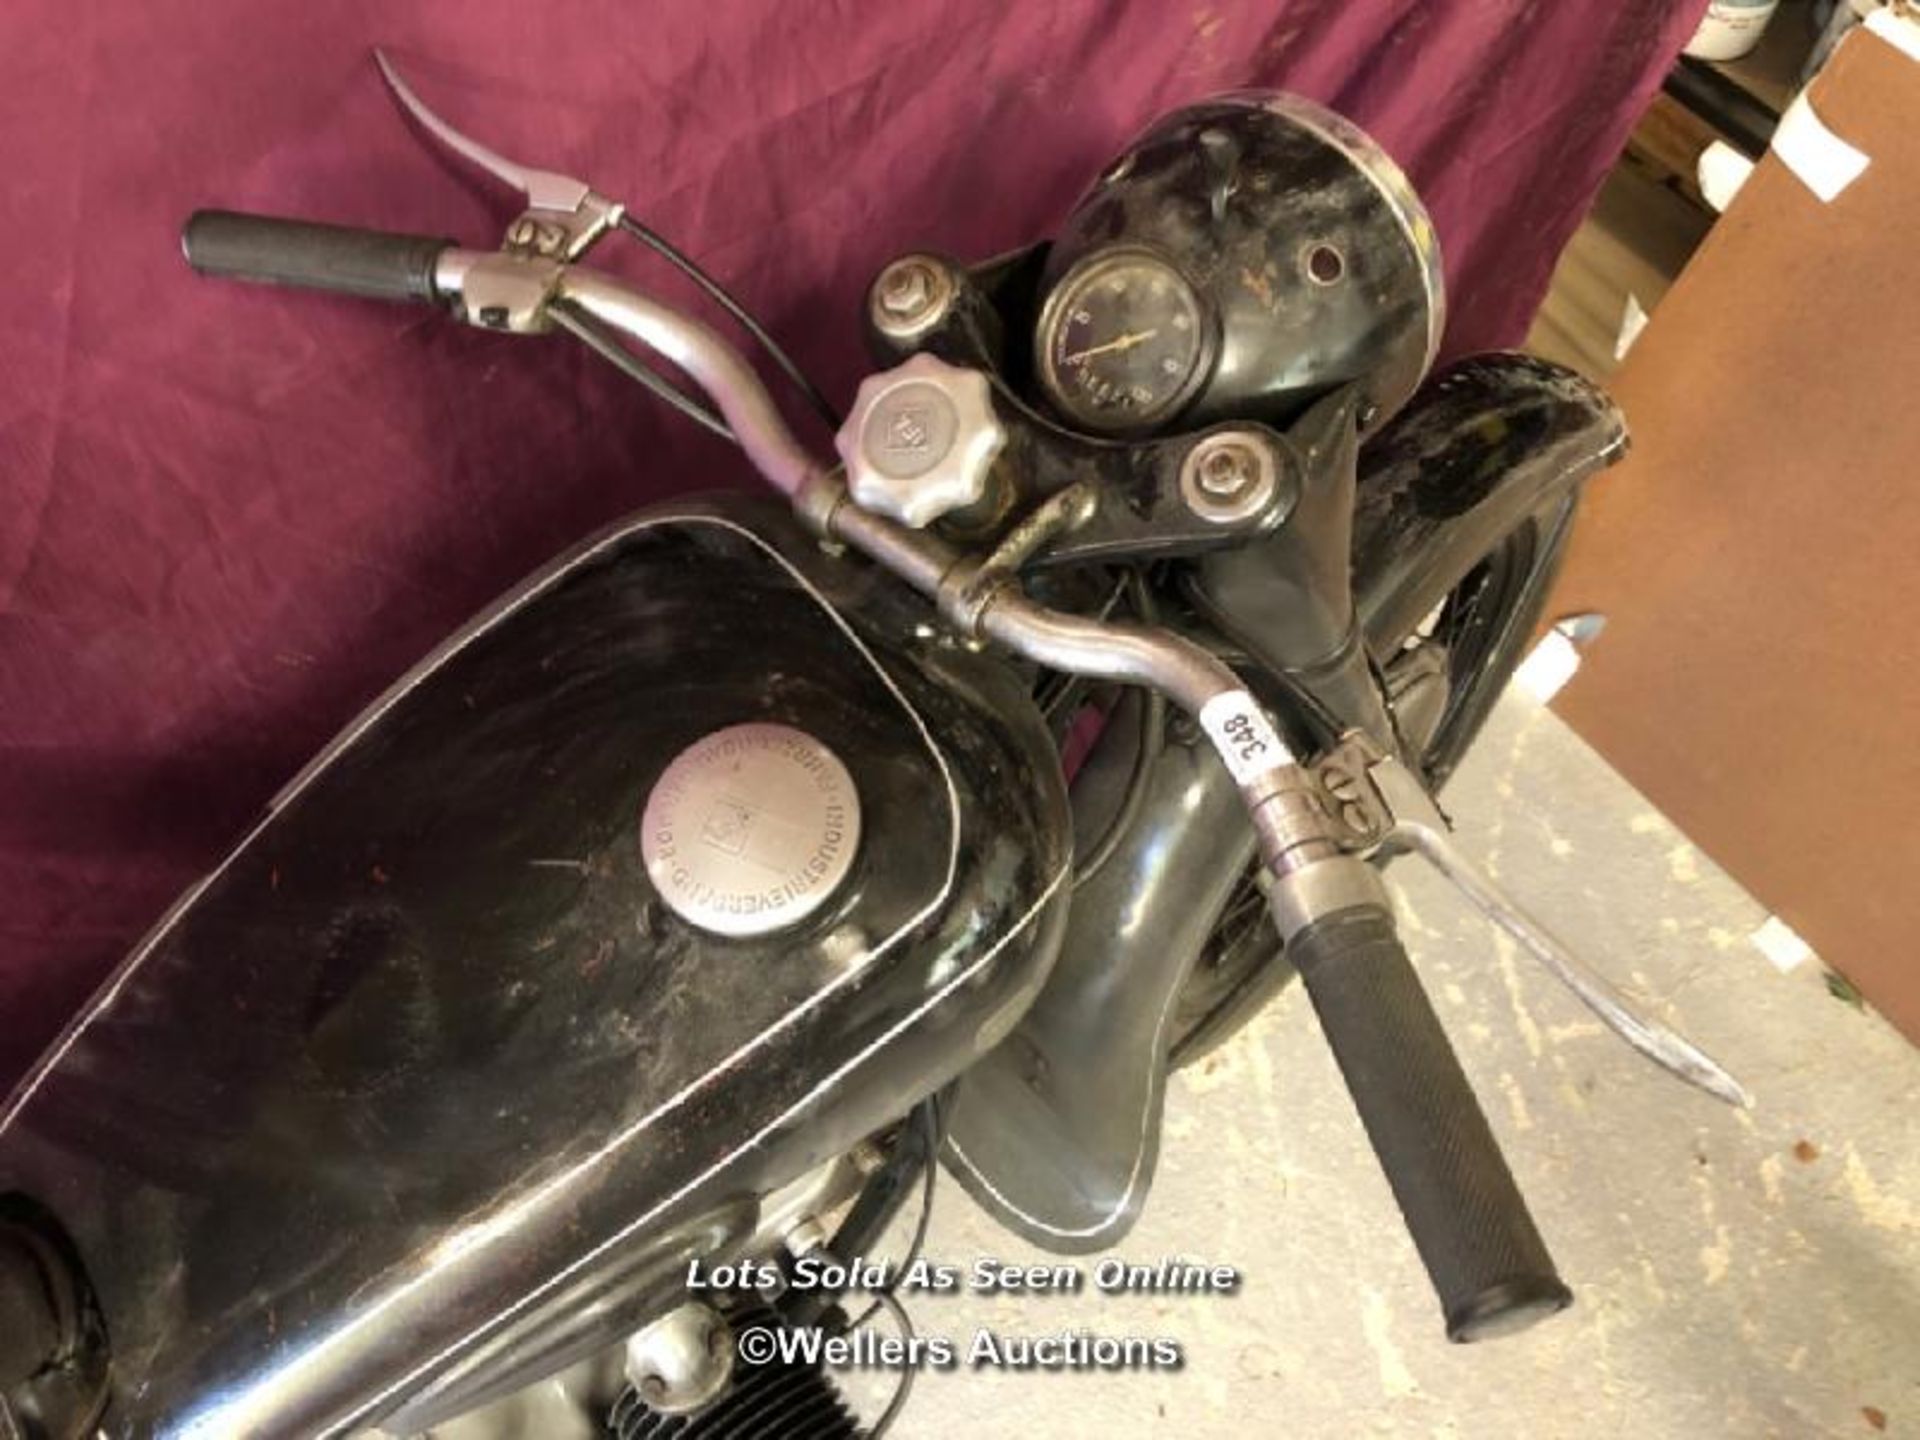 IFA 350 HORIZONTALLY OPPOSED TWIN CYLINDER 1954 MOTORCYCLE, TAX EXEMPT, RUNS WITH GOOD - Image 2 of 12